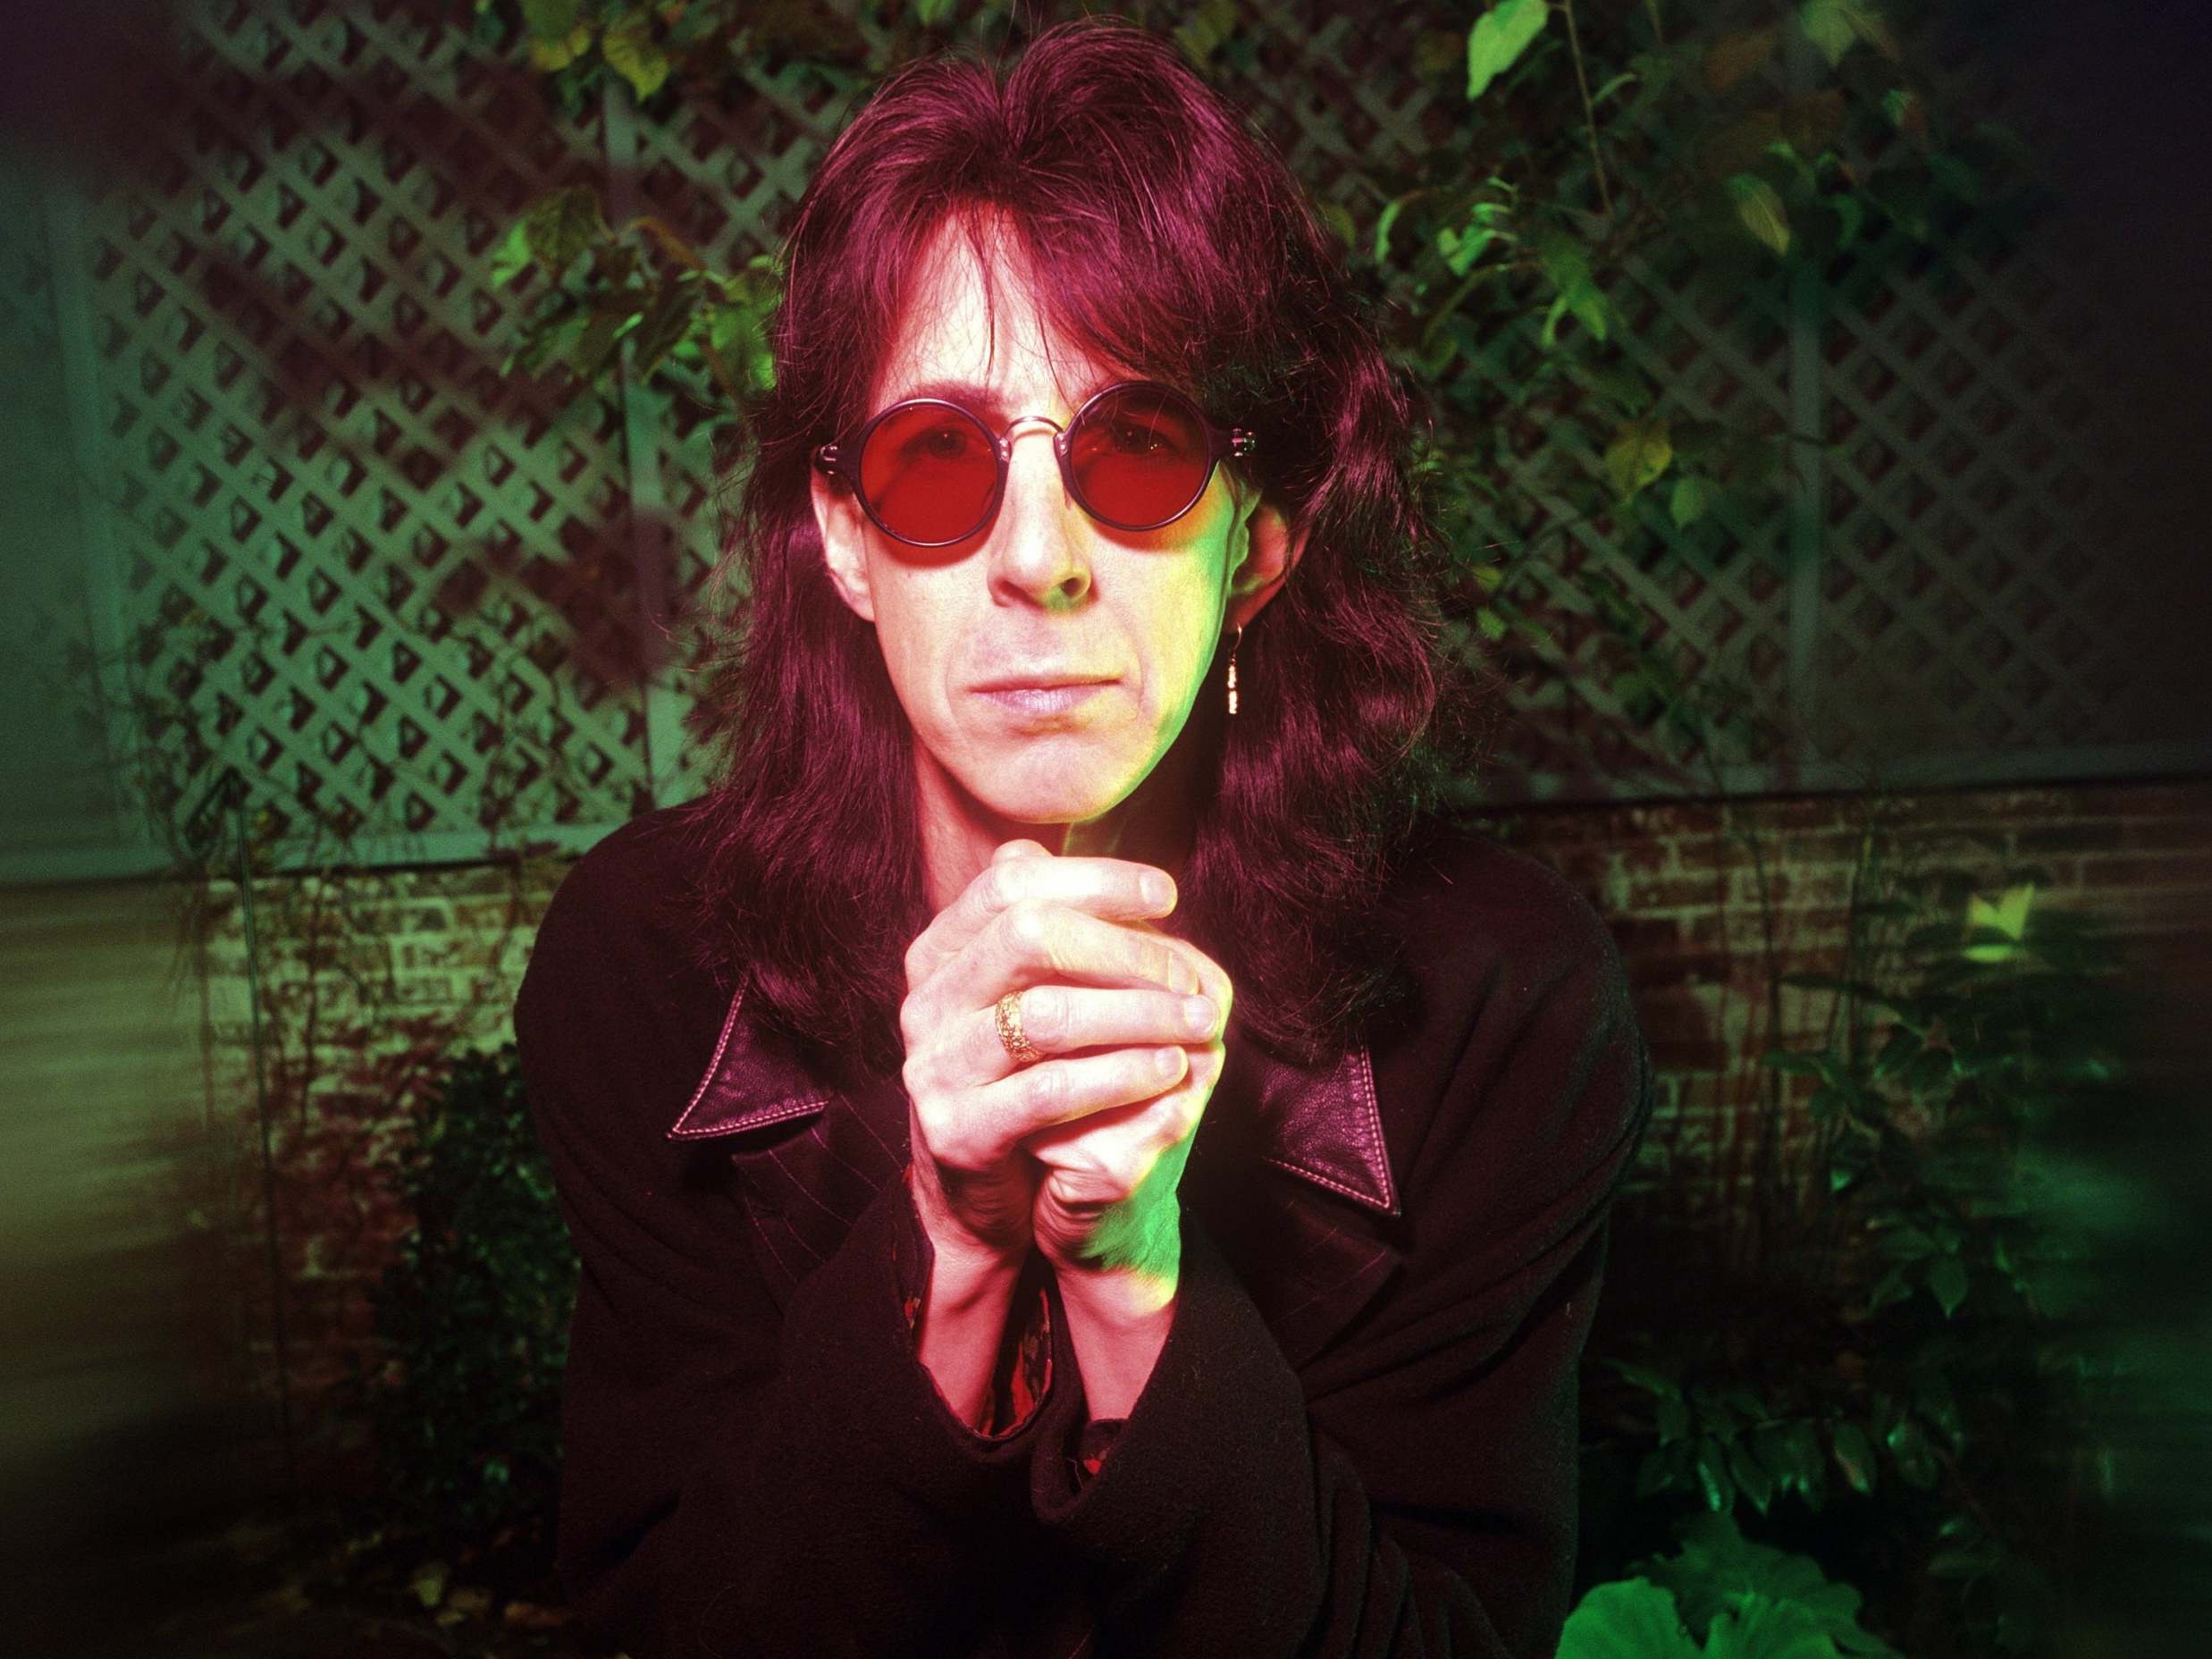 Ric Ocasek Singer Songwriter Whose Band The Cars Were A Radio And Mtv Staple The Independent